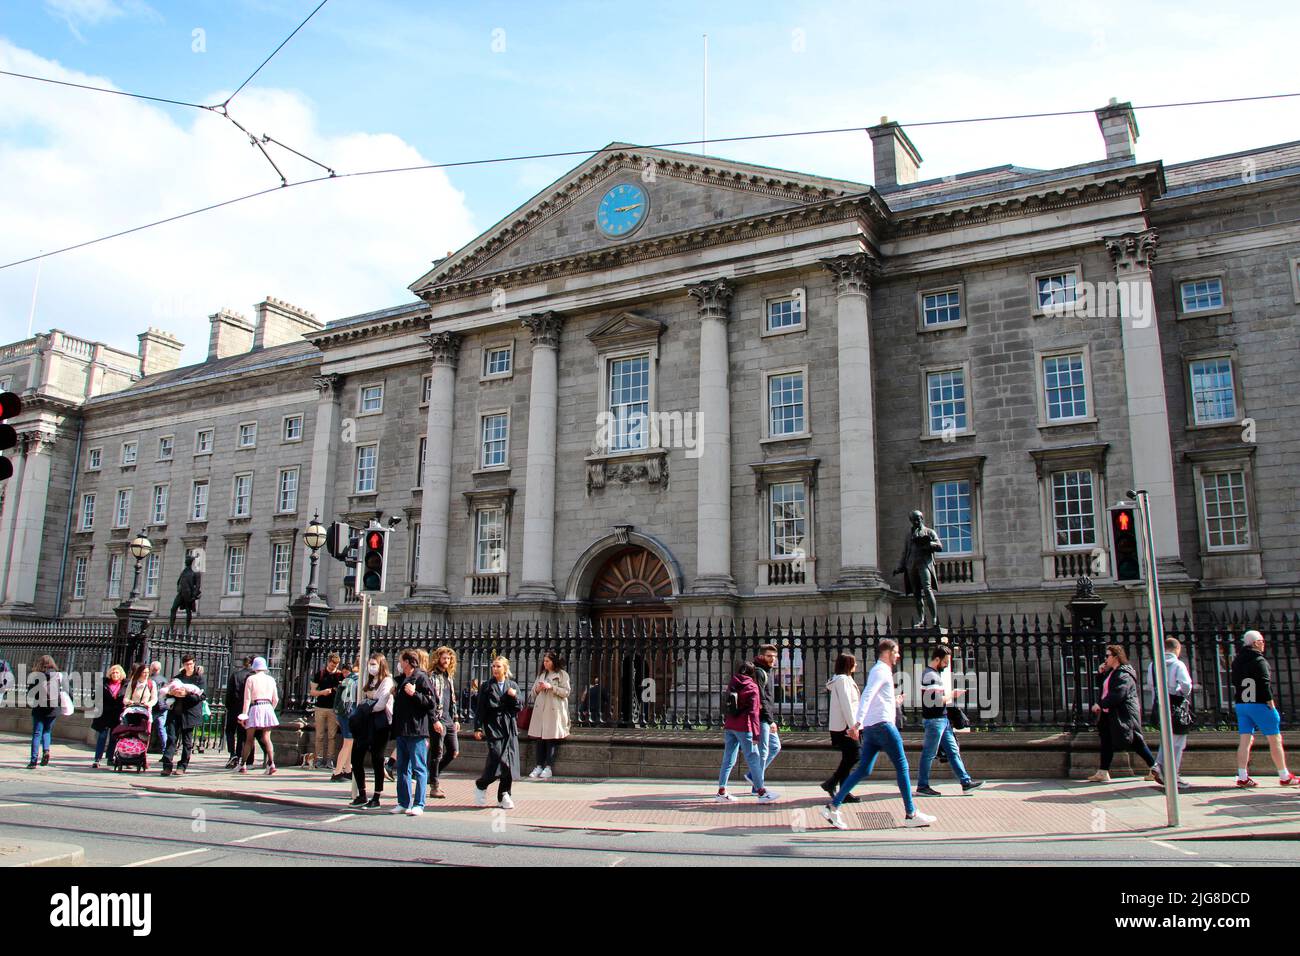 Ireland, Dublin, Trinity College, Old Library building, Long Room, books Stock Photo